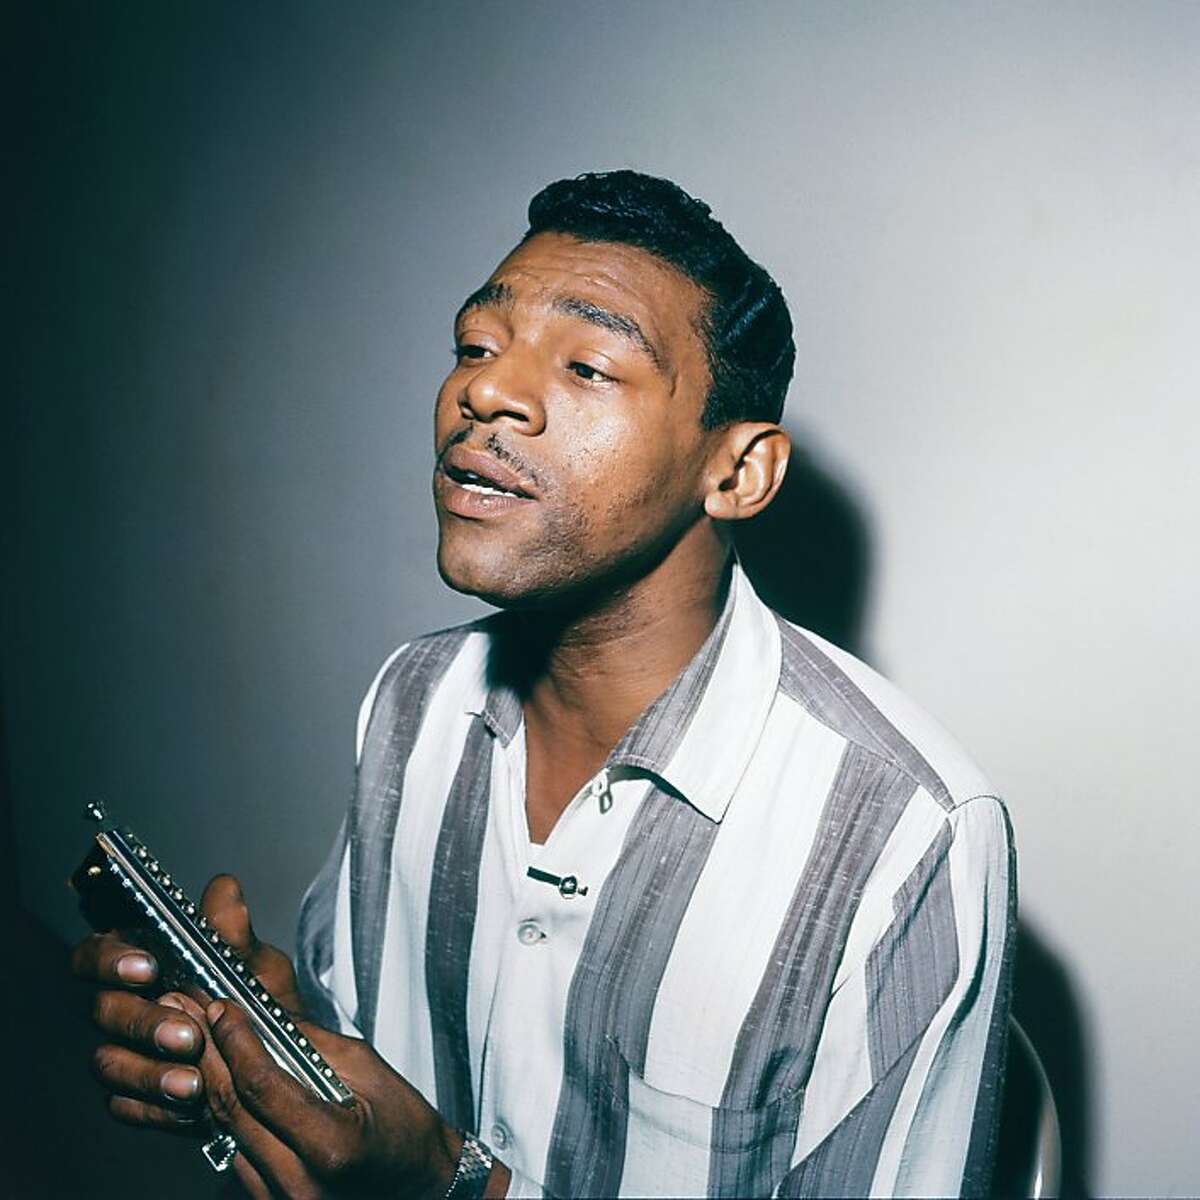 Mark Hummel 's 22nd annual Blues Harmonica Blowout this year billed as a tribute to Little Walter, pictured.